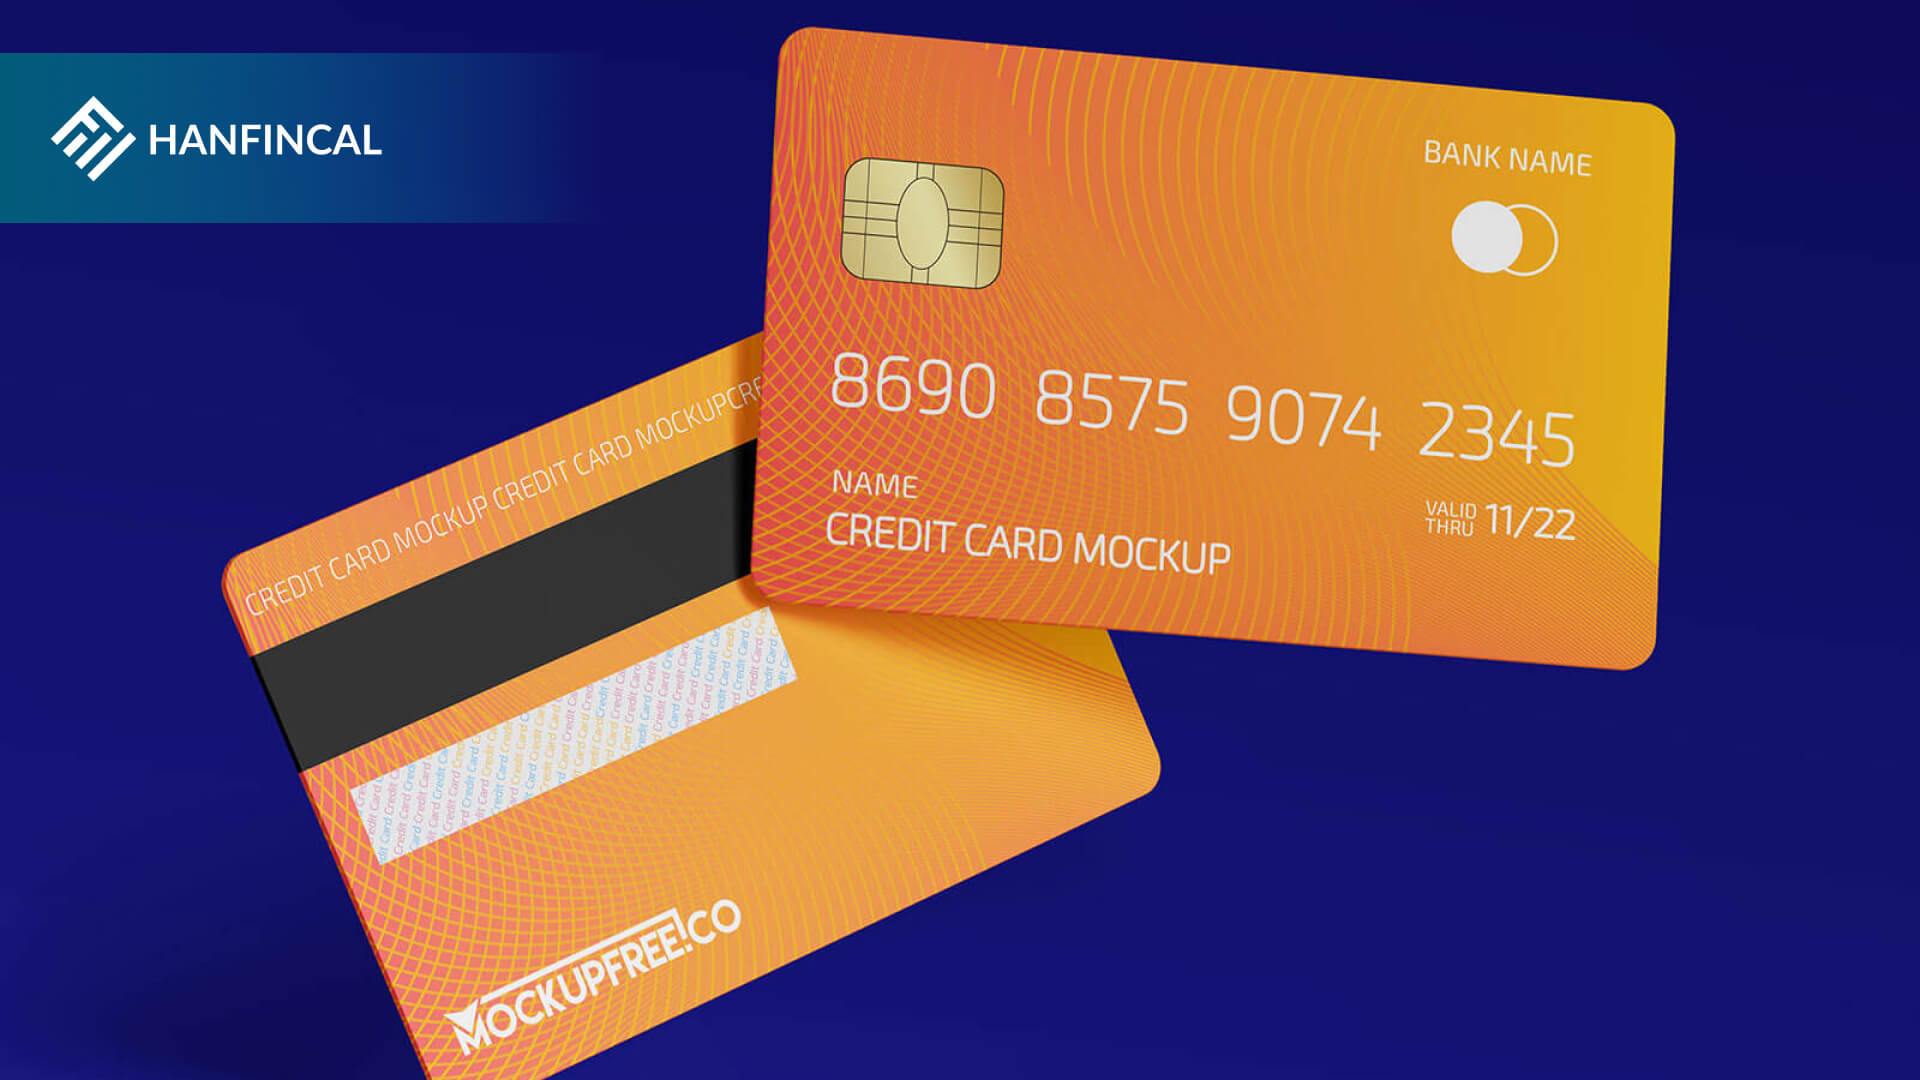 How to change name on credit card?